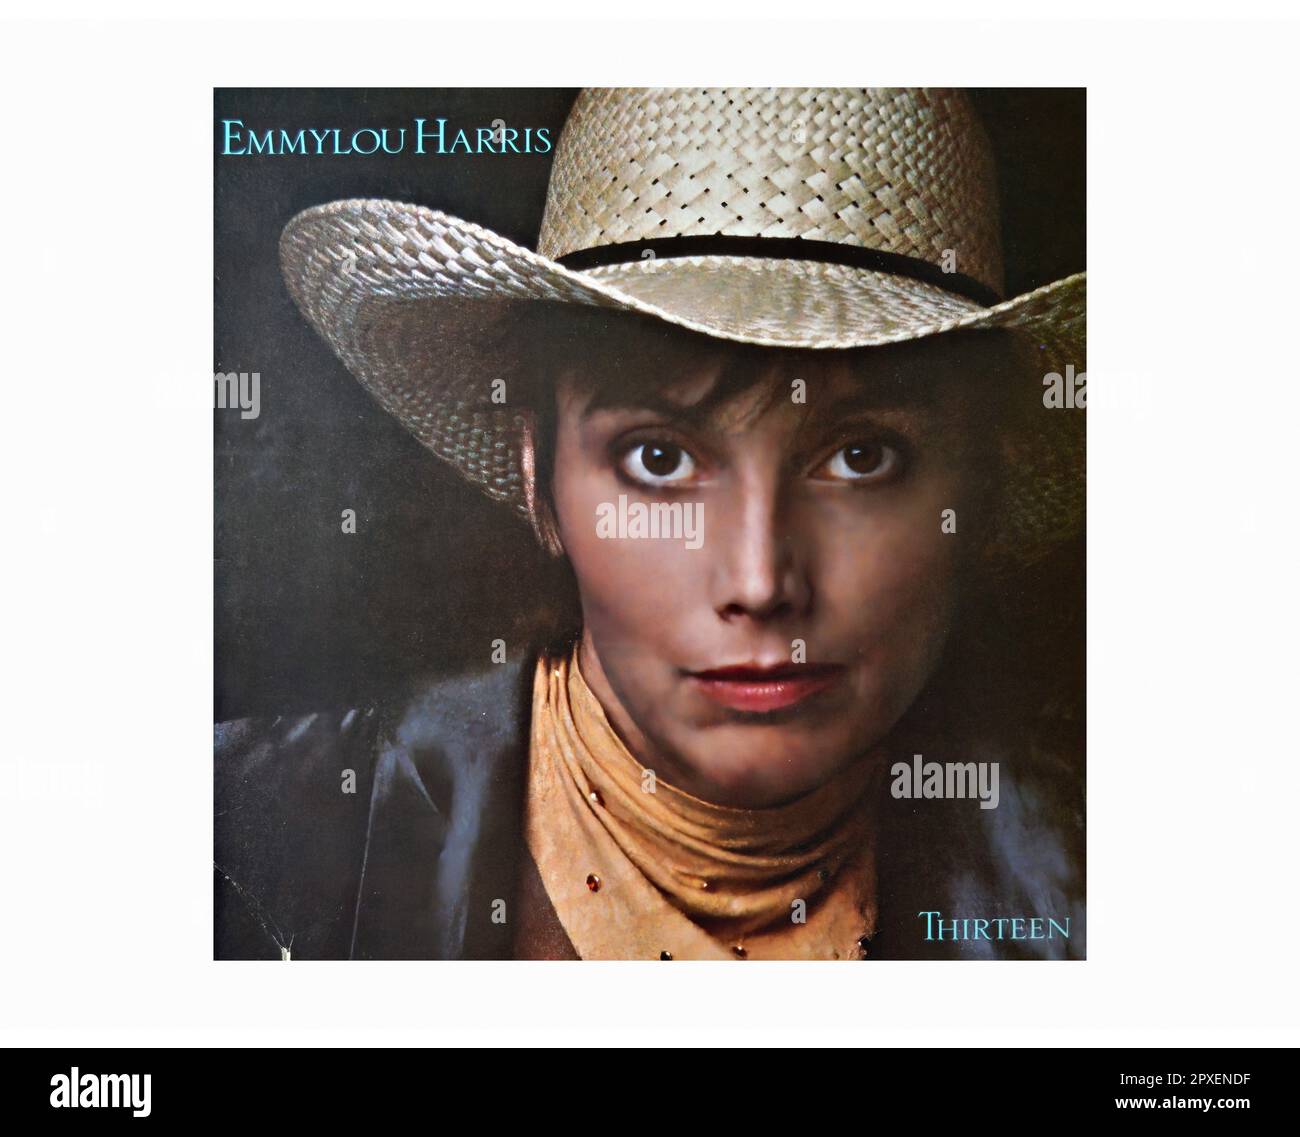 Emmylou Harris Cut Out Stock Images And Pictures Alamy